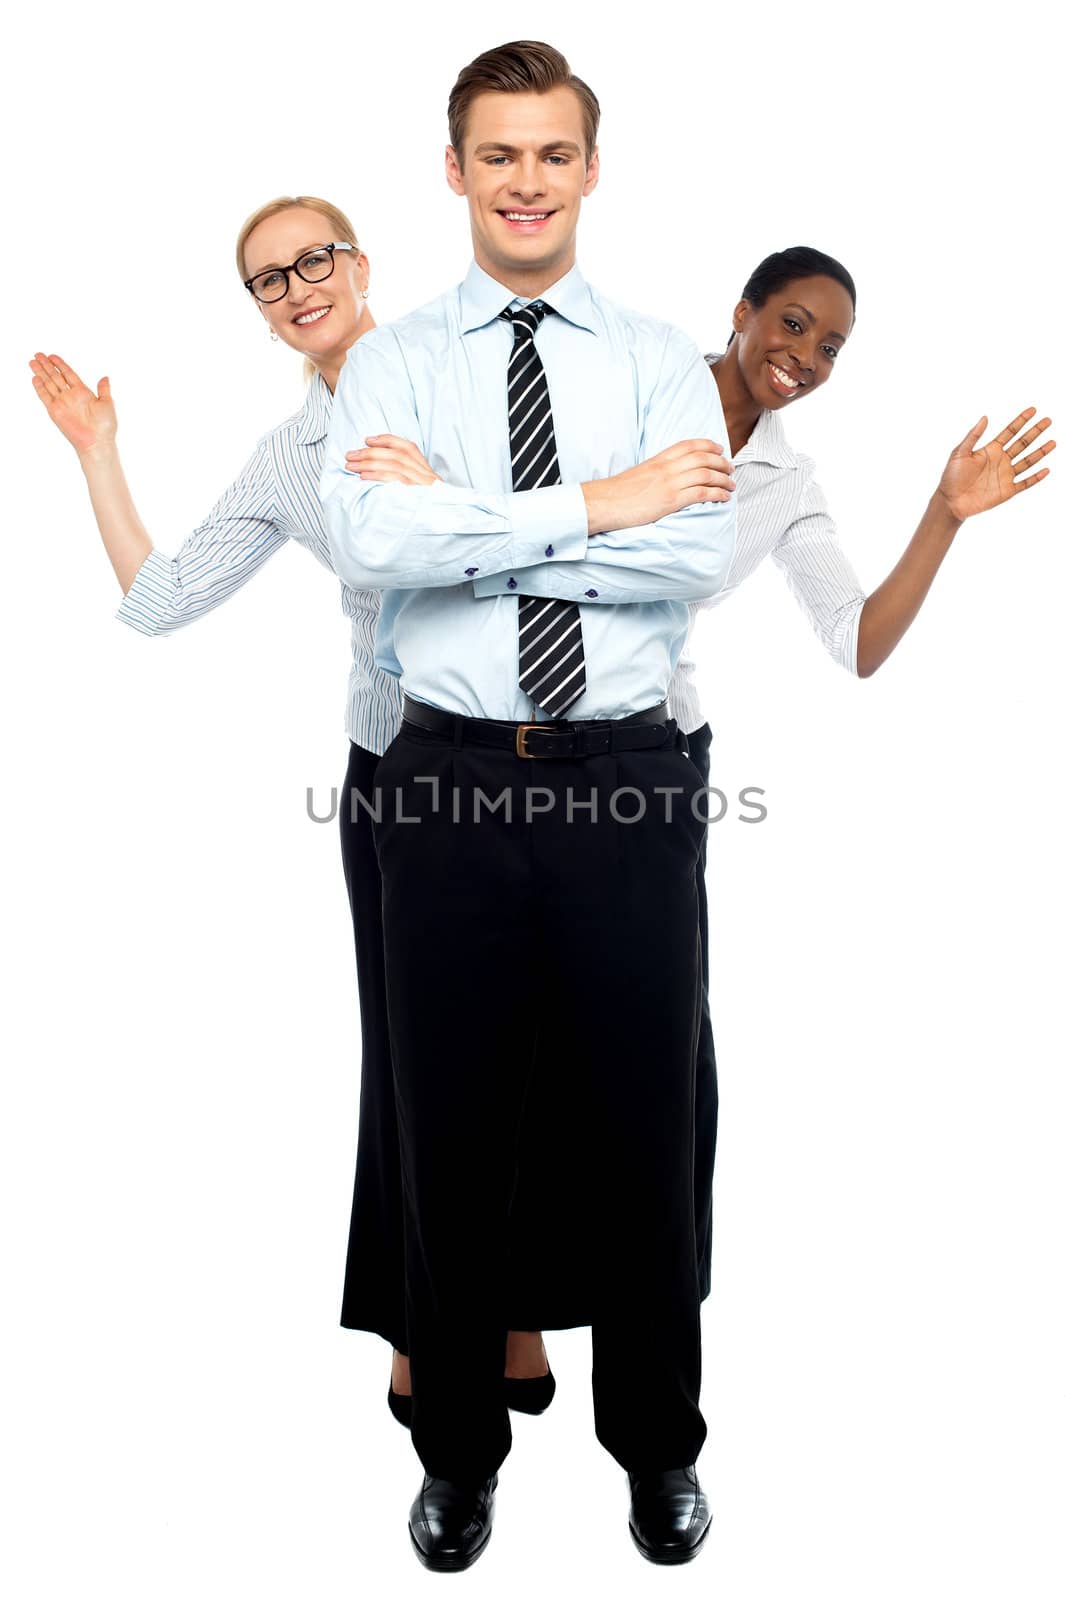 Female corporate waving hi while man stands tall against white background